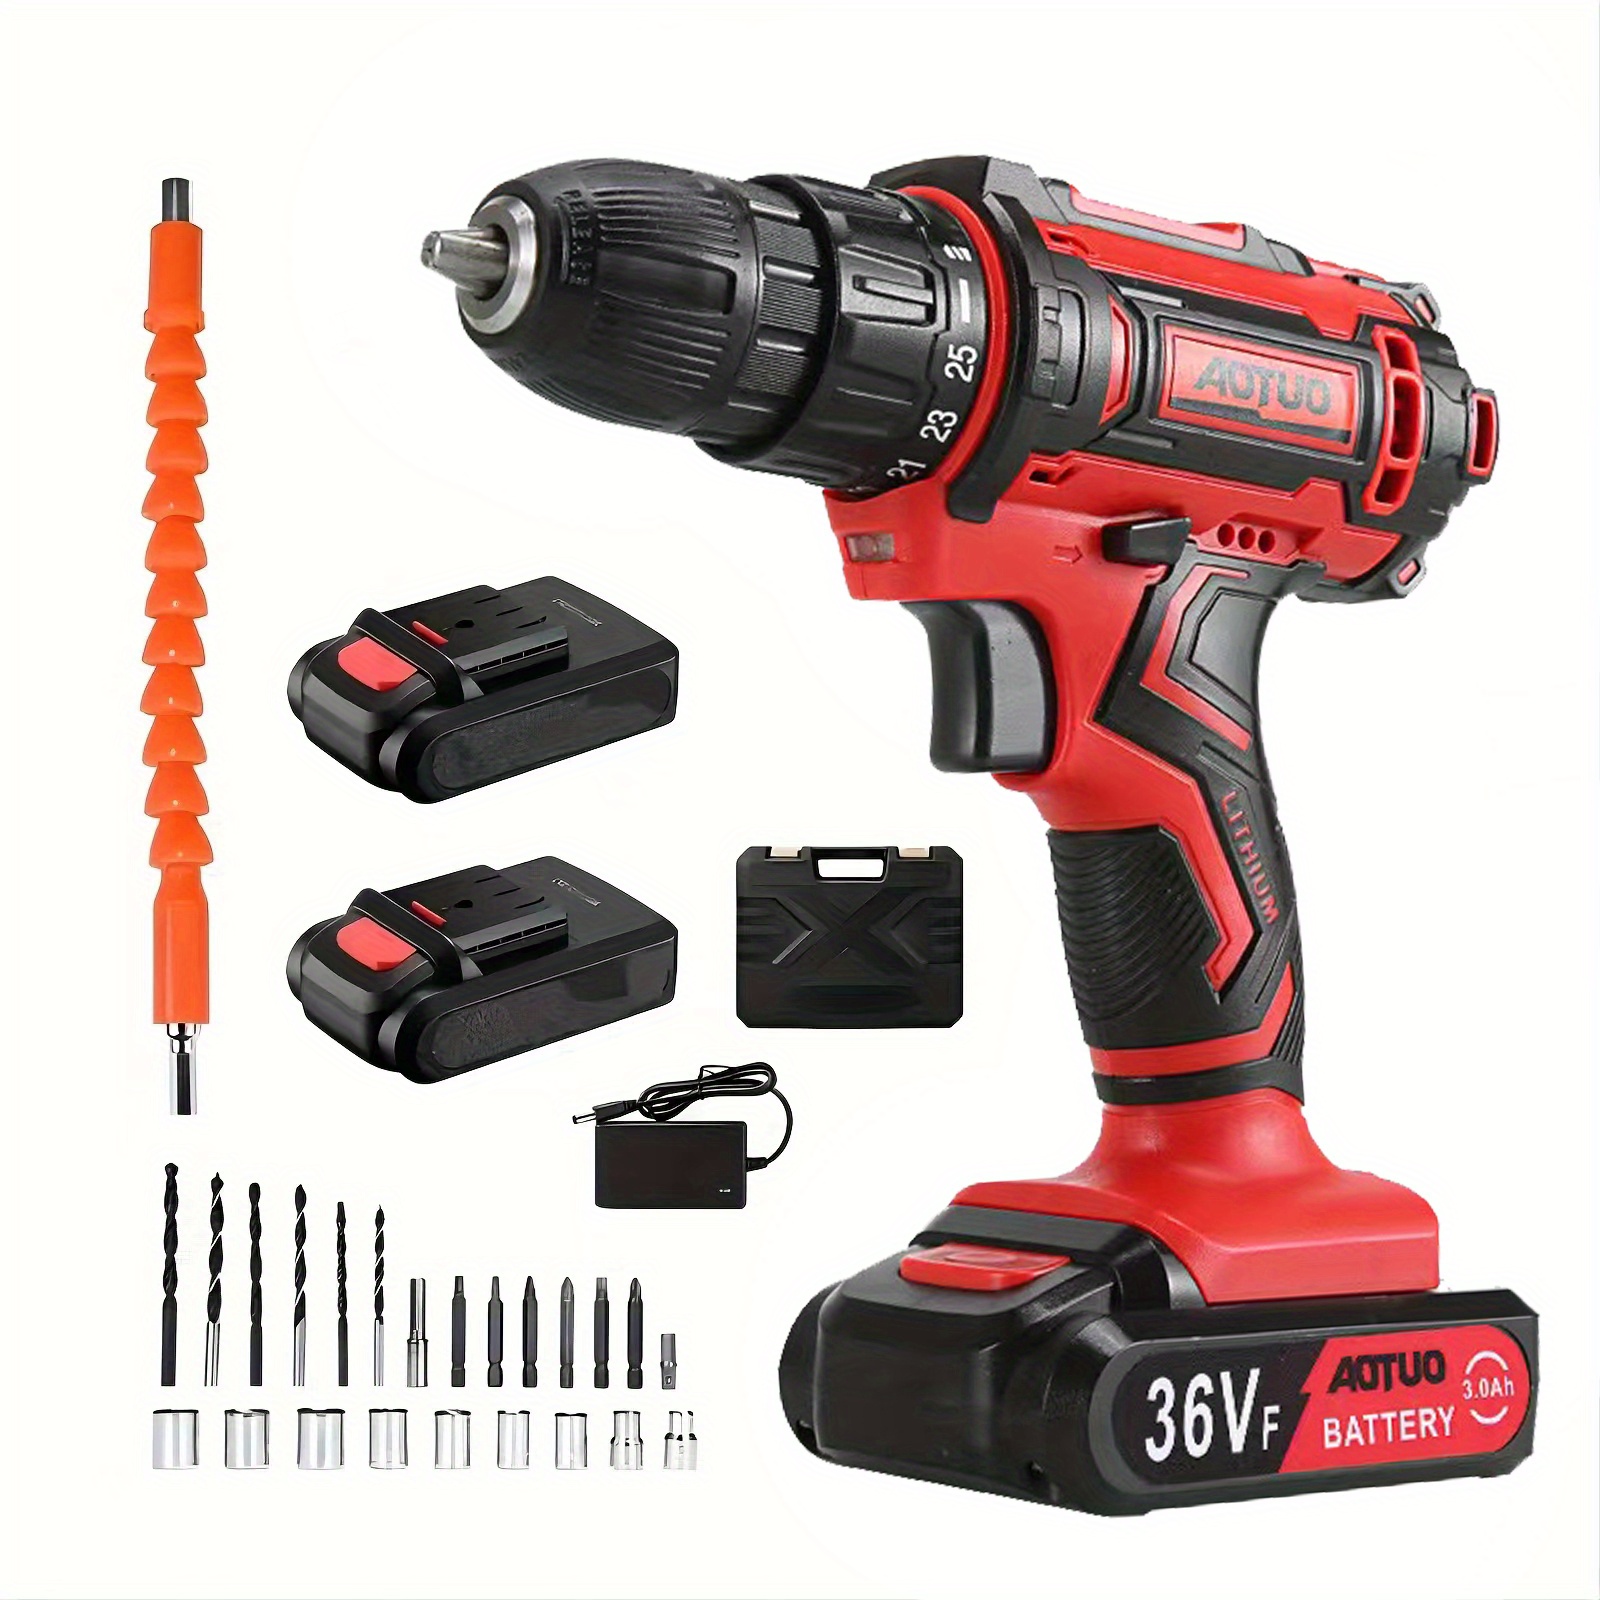 Cordless Combi Drill Electric Screwdriver 2 Speed Small Hand Drill Battery